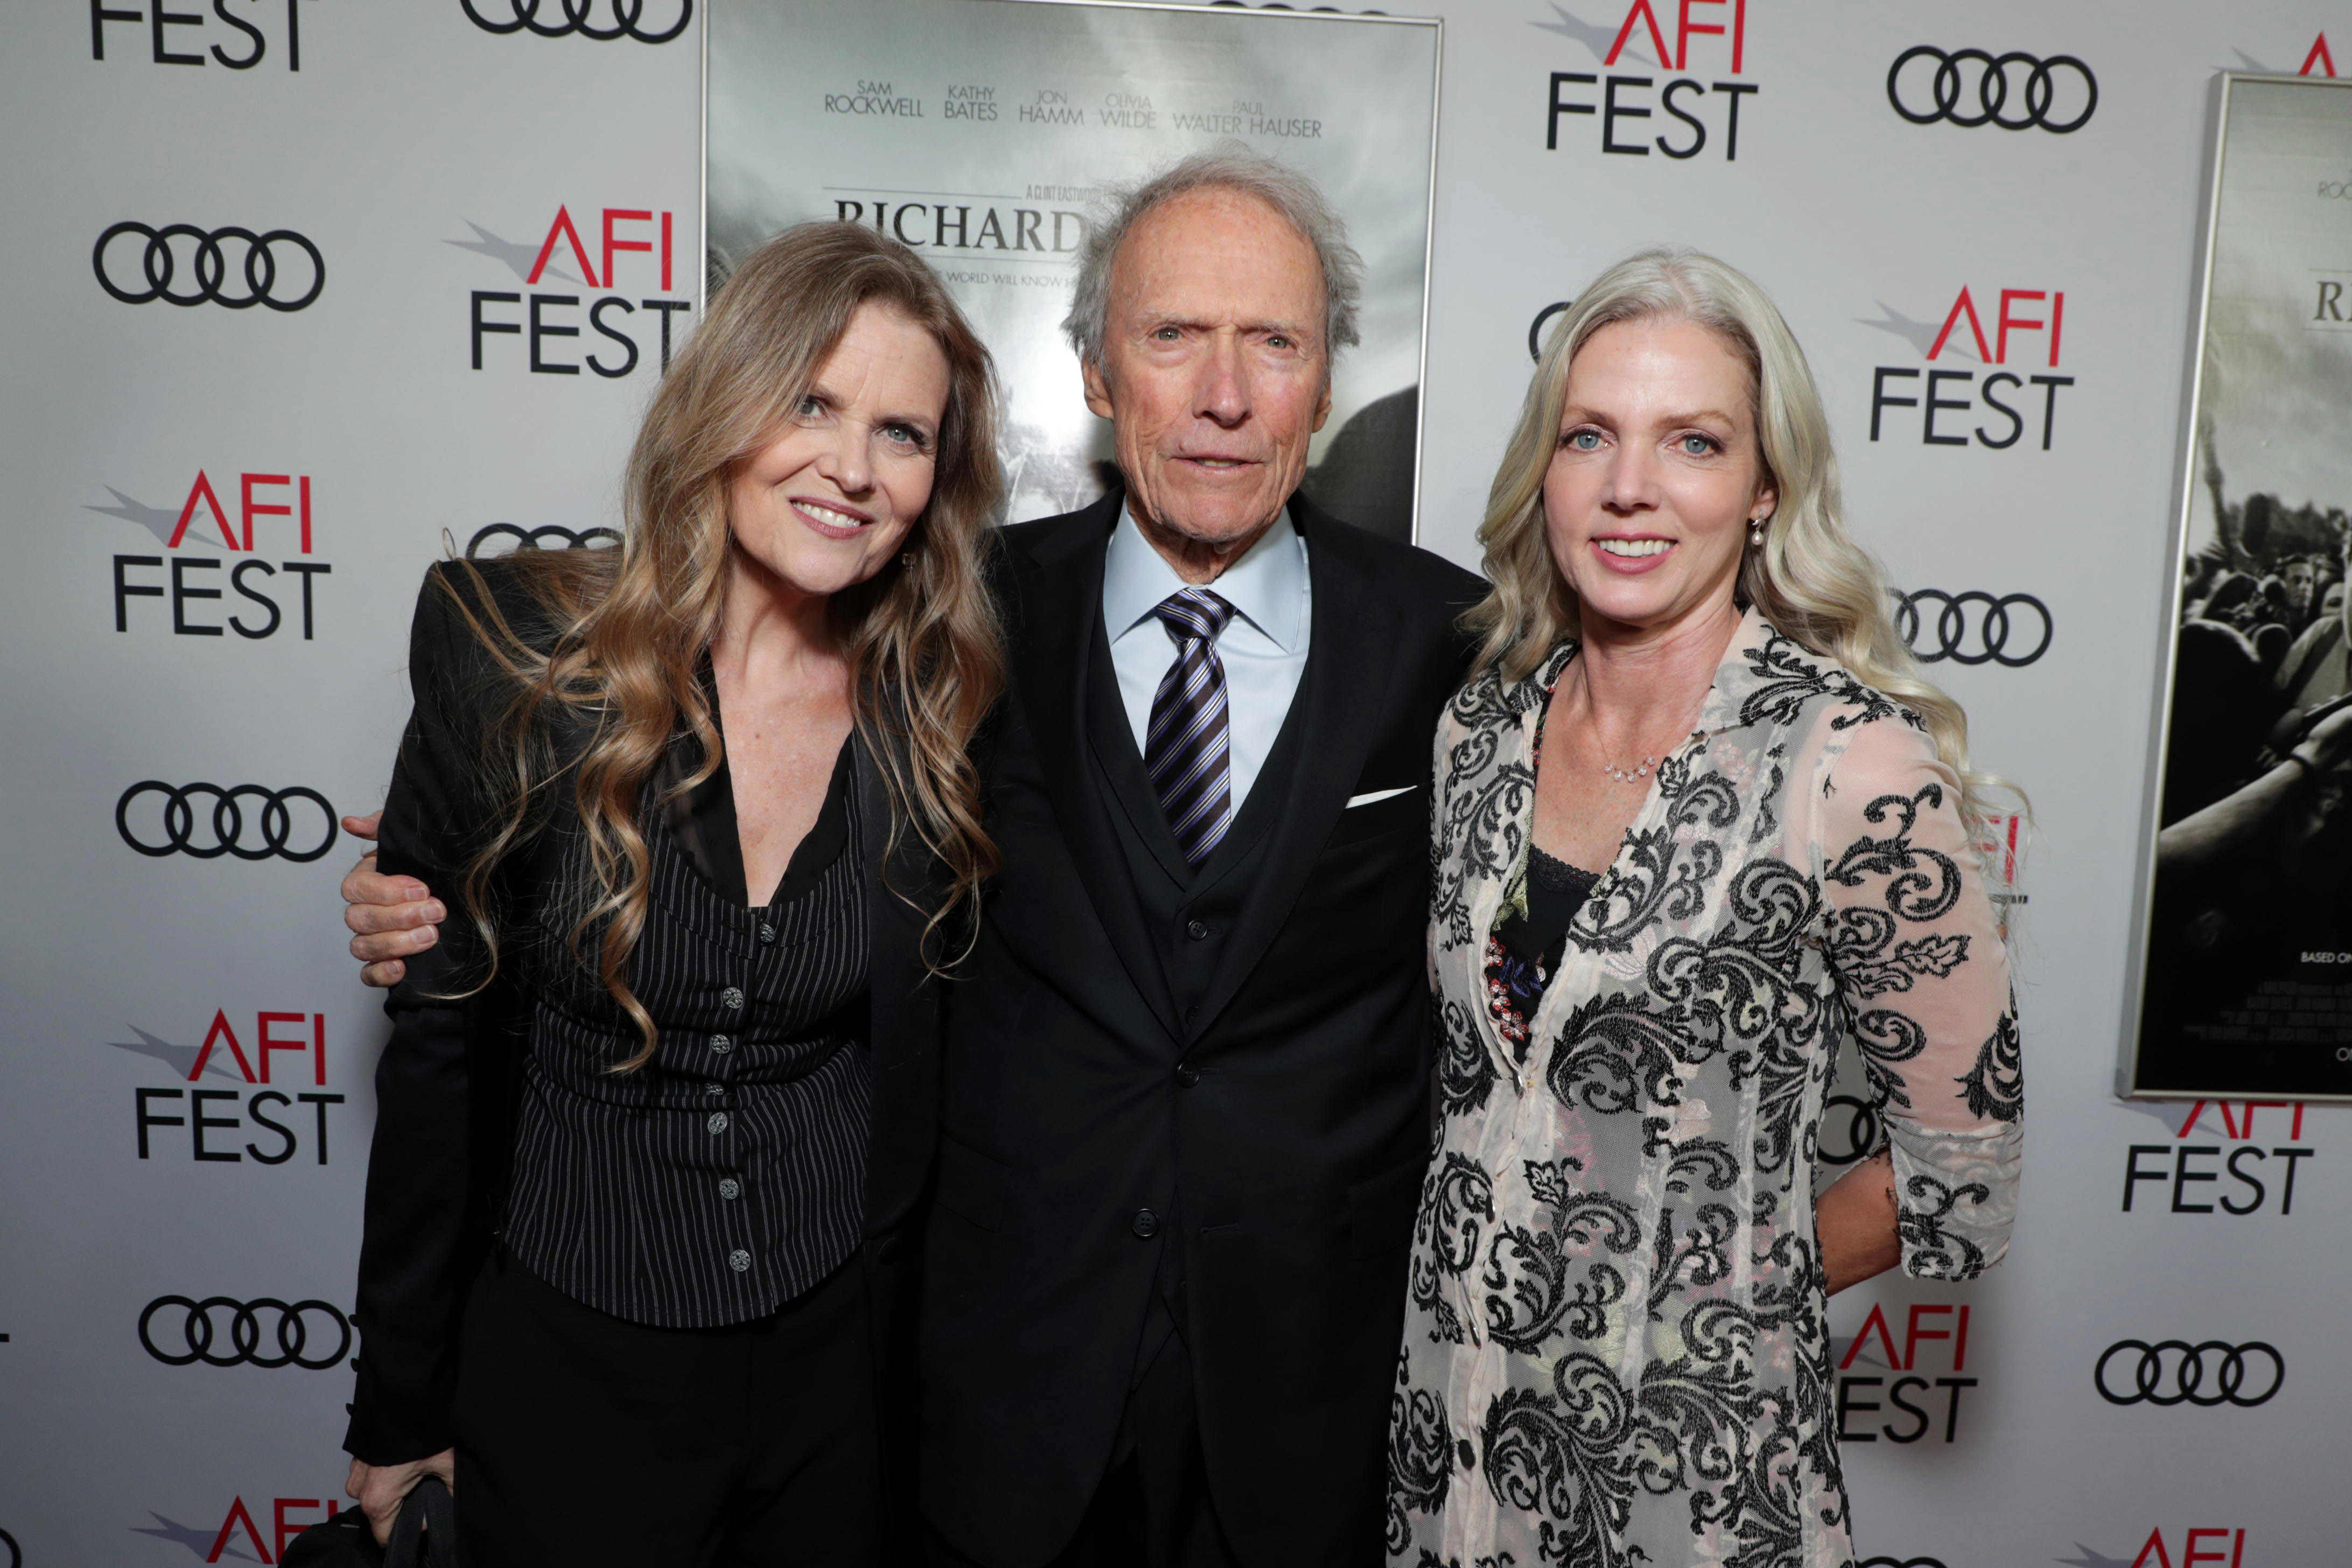 Clint Eastwood and Christina Sandera at the Warner Bros. Pictures premiere of Richard Jewell at AFI Fest 2019